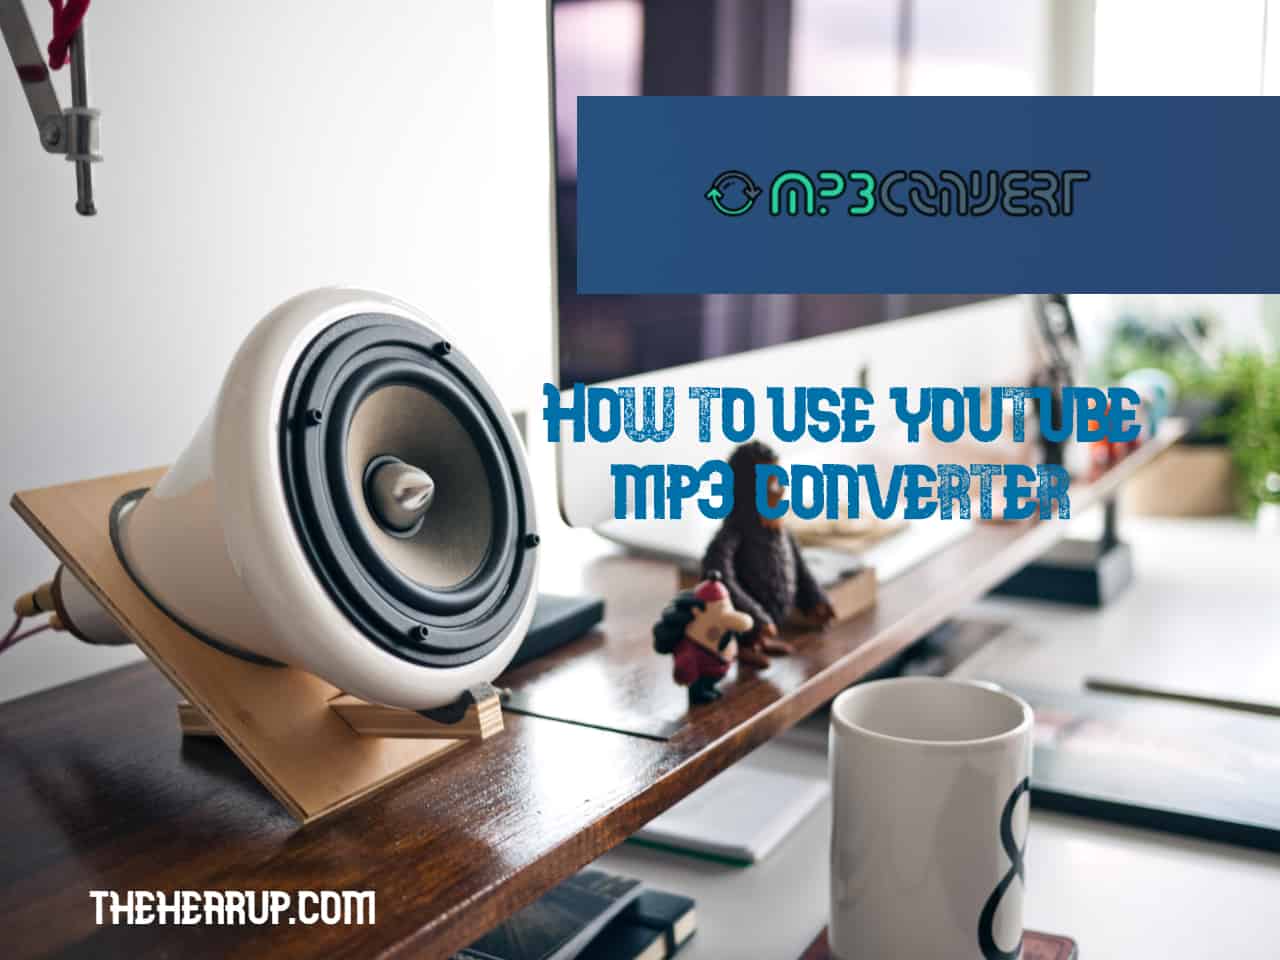 How to use youtube mp3 converter